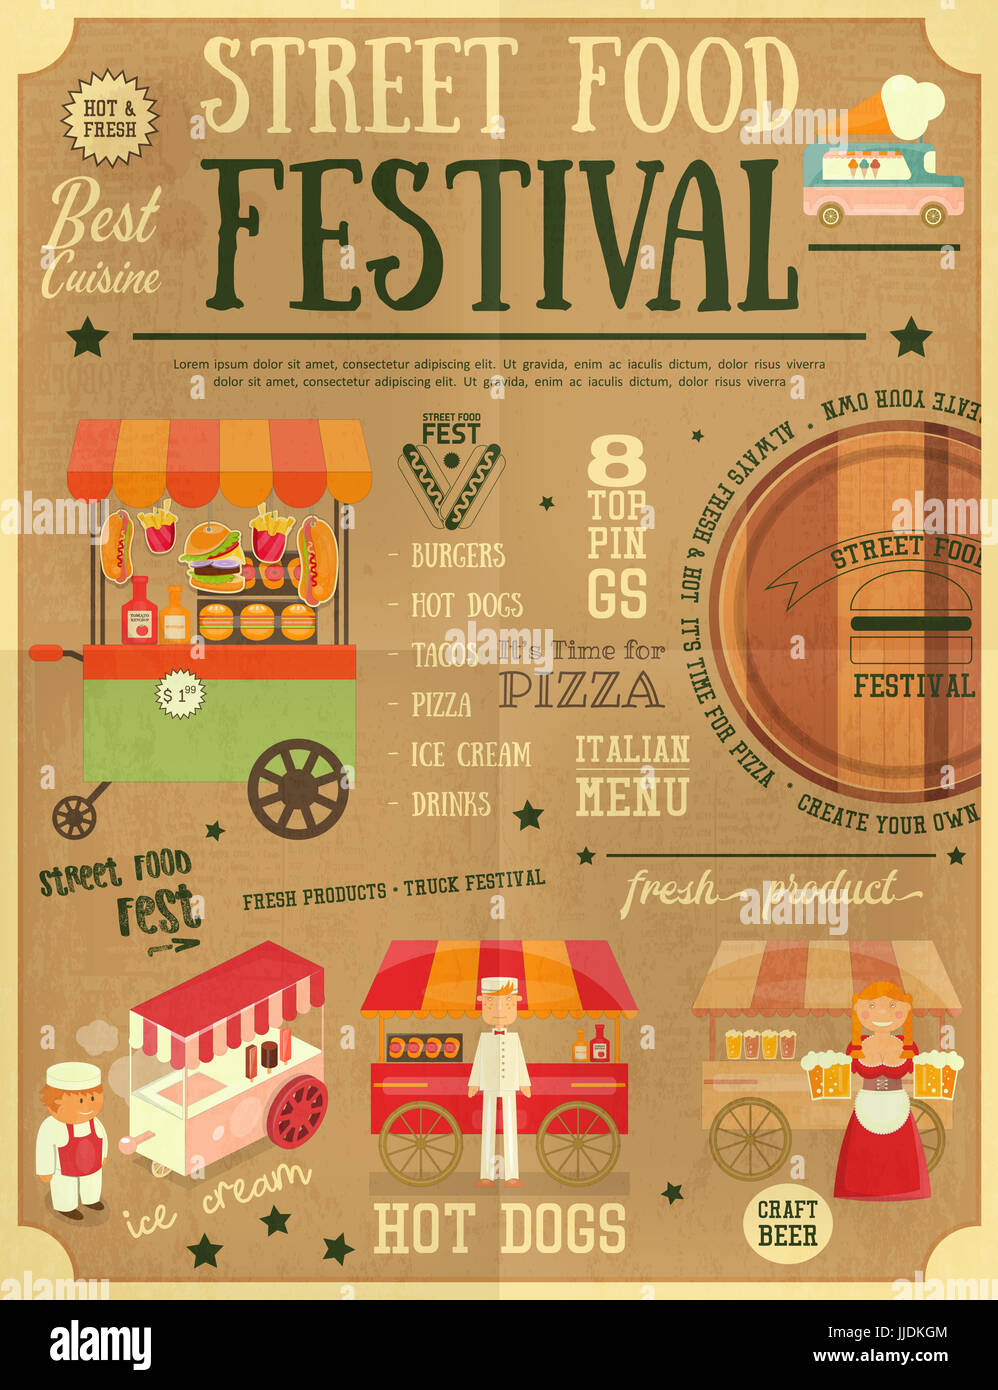 Street Food and Fast Food, Truck Festival on Vintage Retro Poster